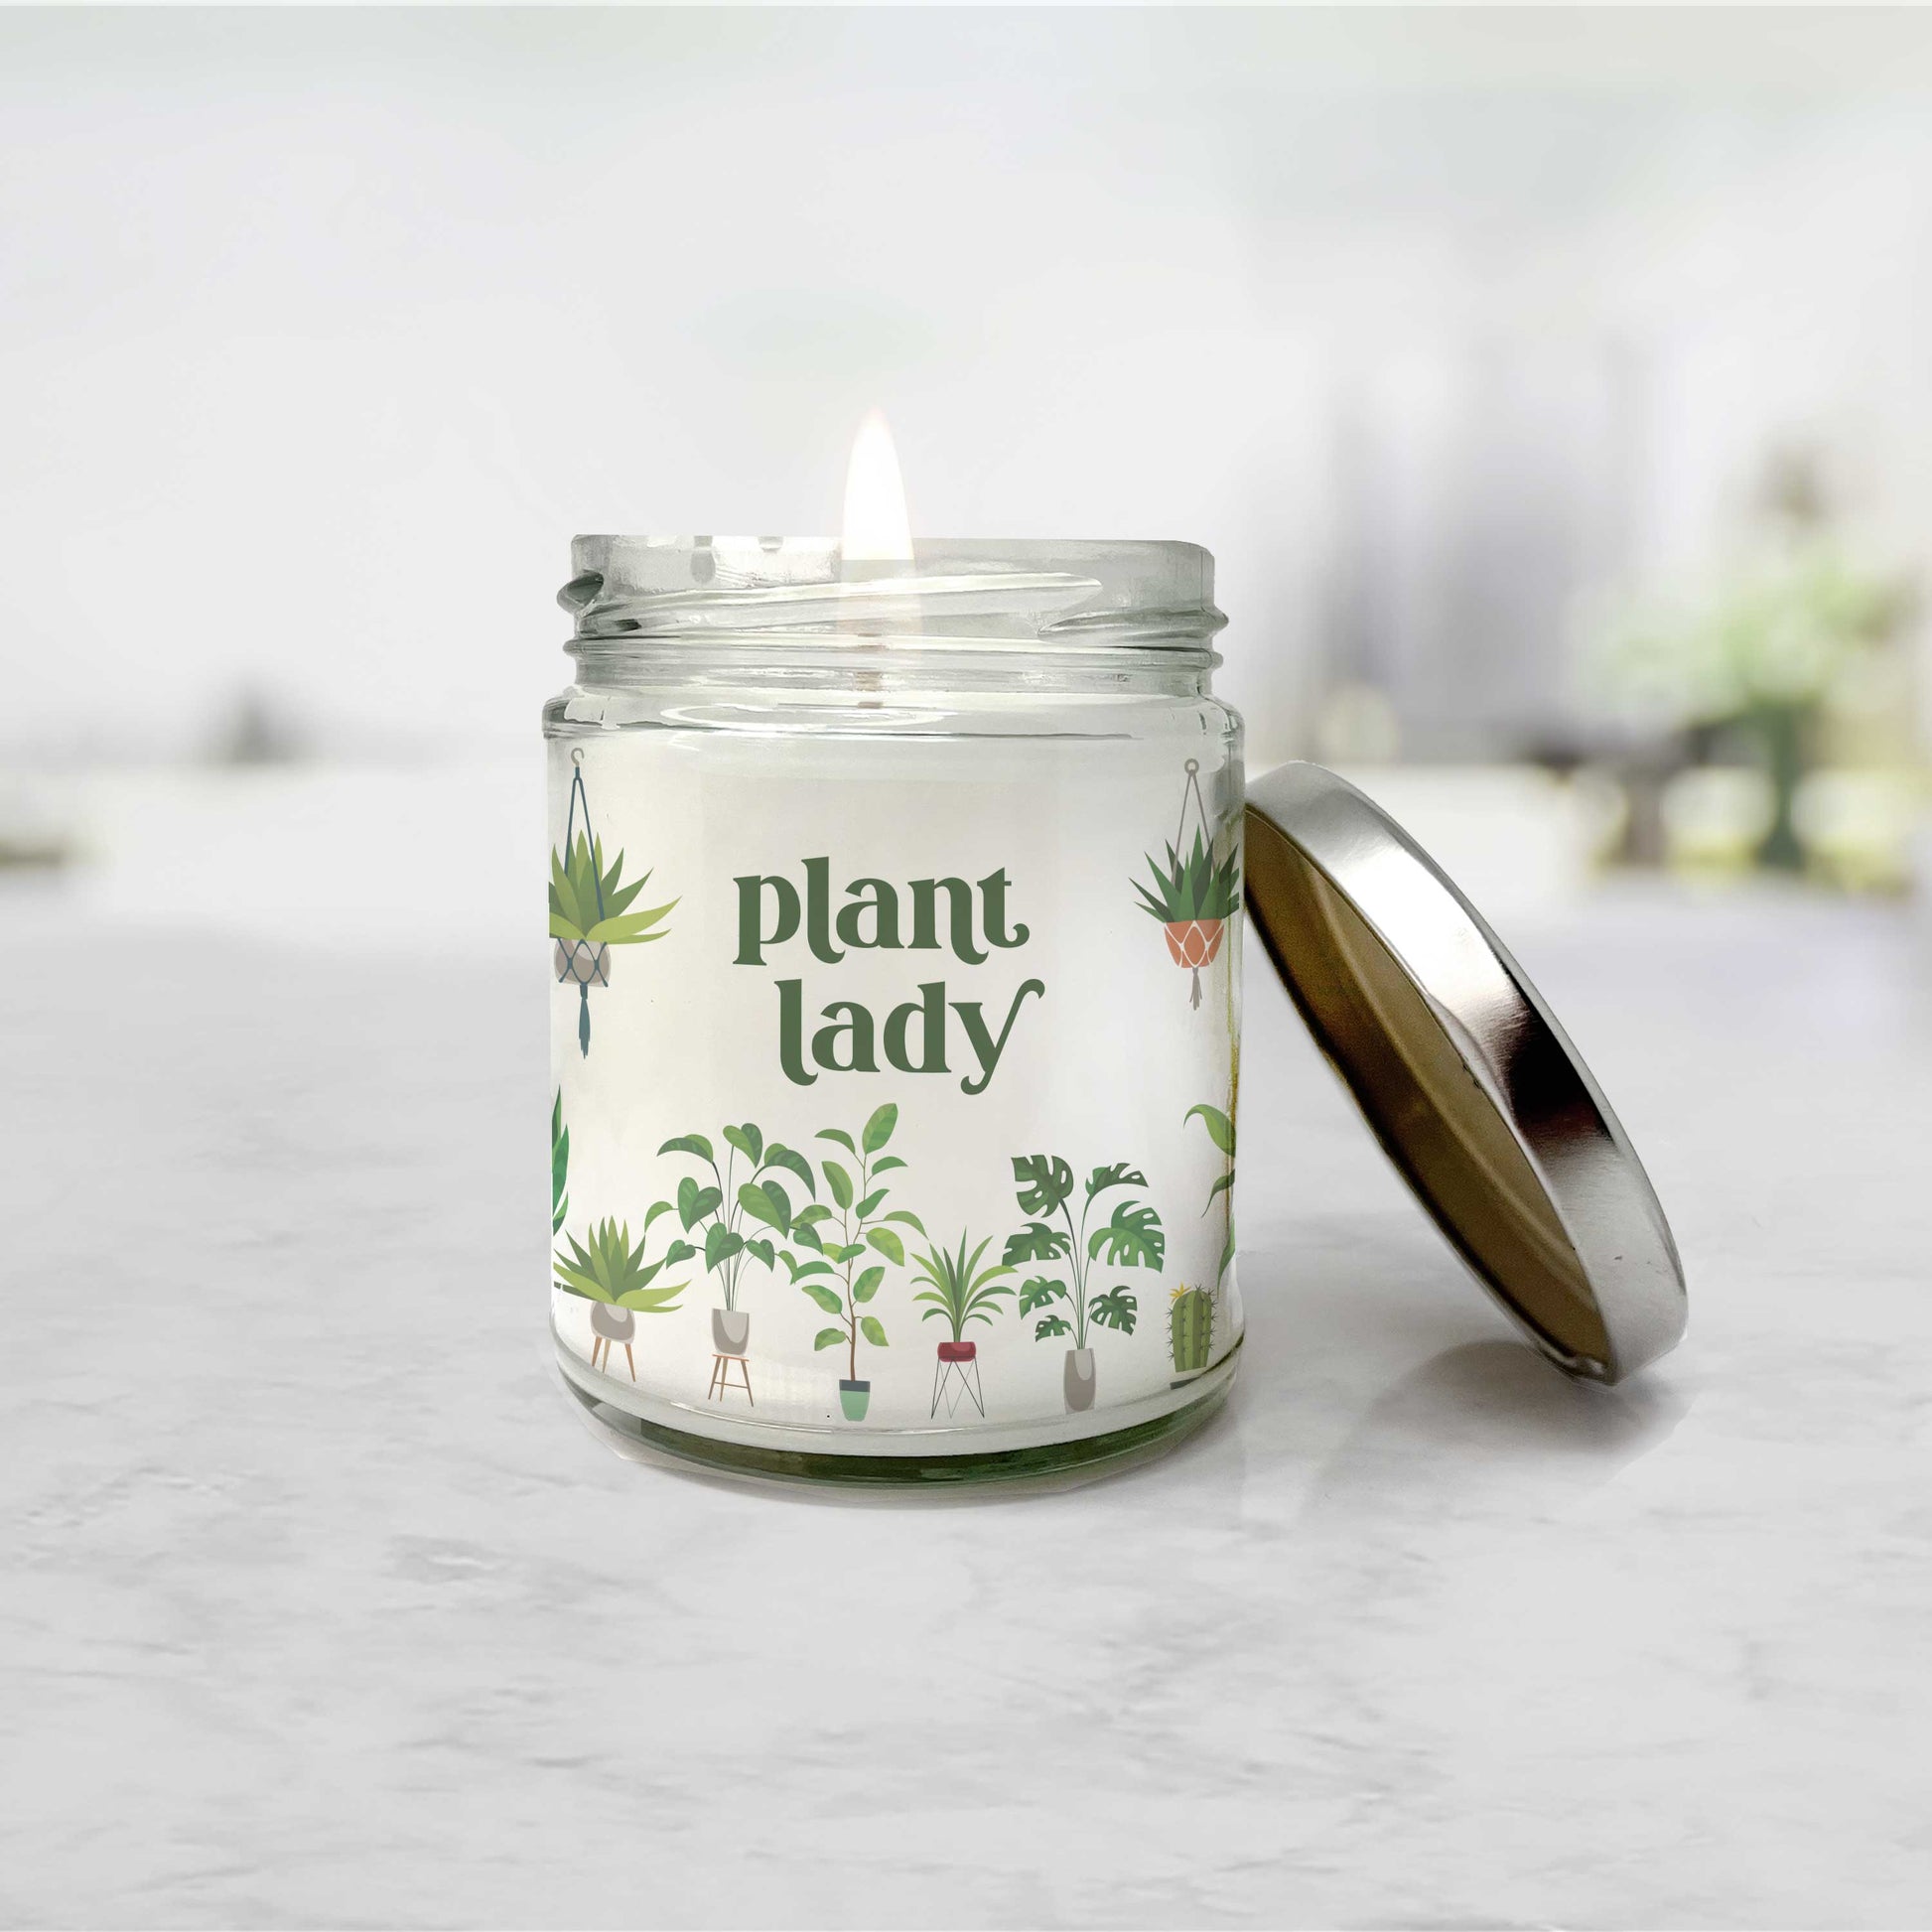 Plant lover gifts | plant lady candle | gifts for plant people candles - Paisley Grace Makery